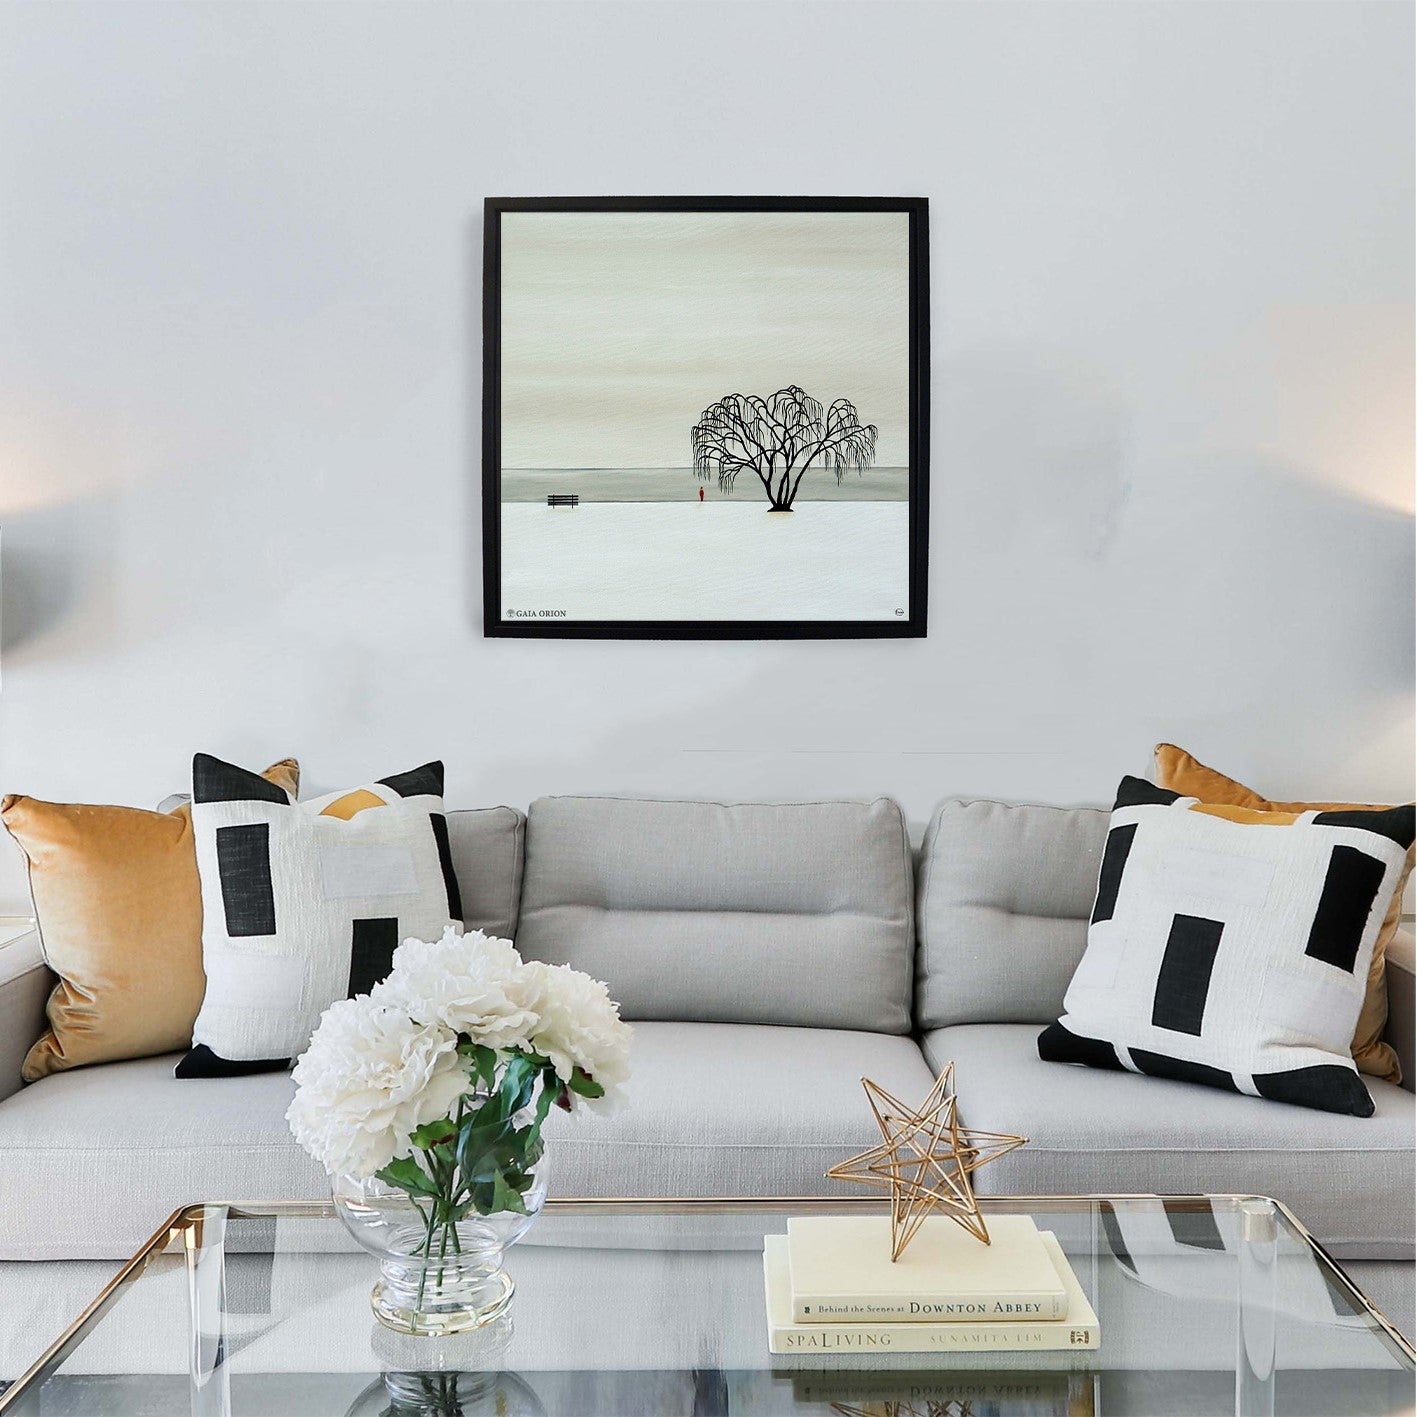 A framed print that is all white with snow and a willow tree a peaceful painting